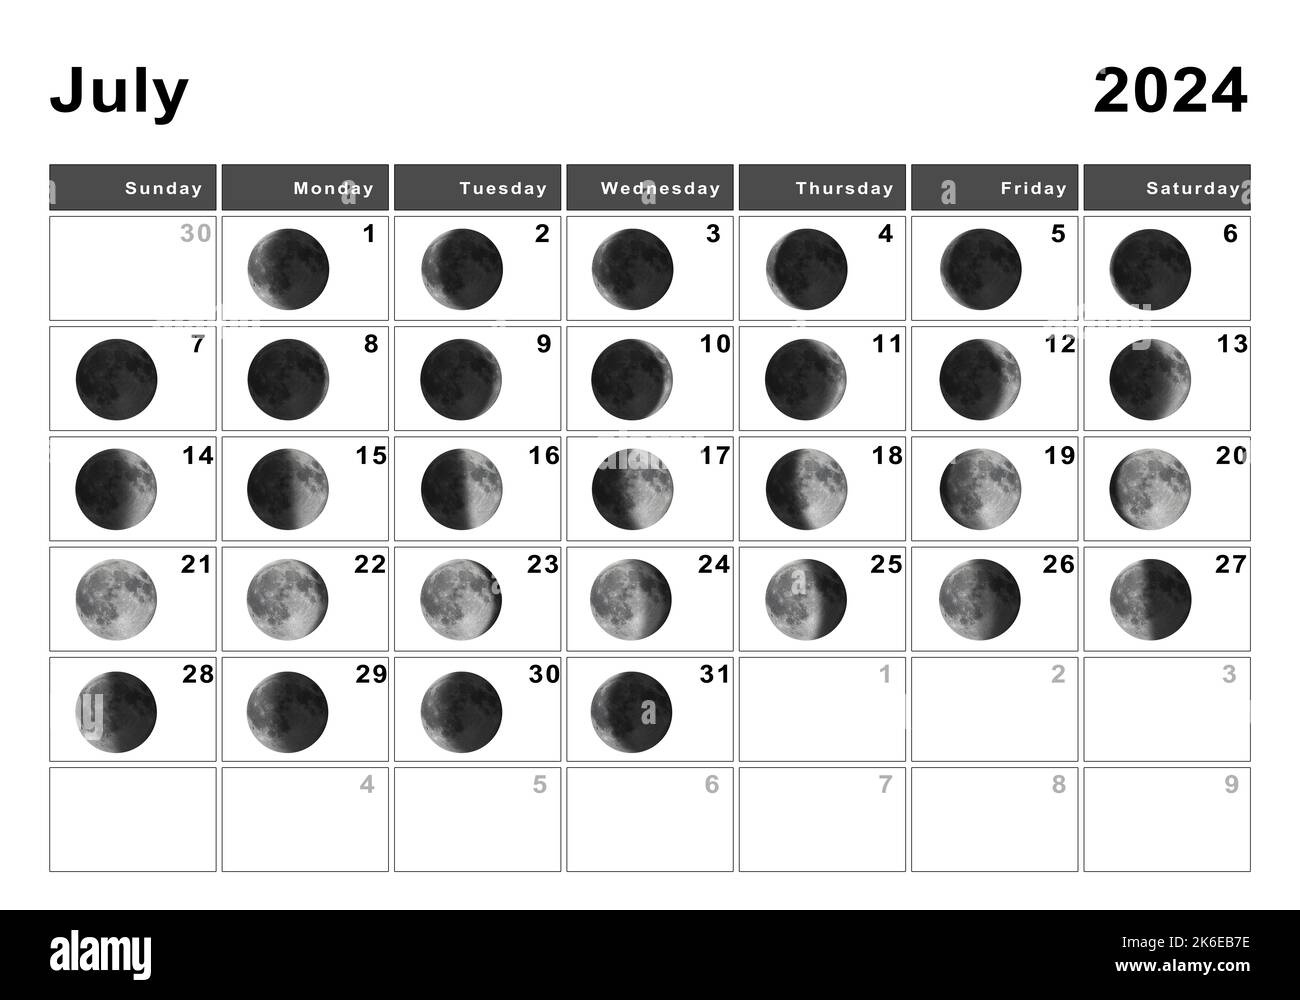 July 2024 Lunar Calendar, Moon Cycles, Moon Phases Stock Photo - Alamy intended for Moon Phase Calendar For July 2024